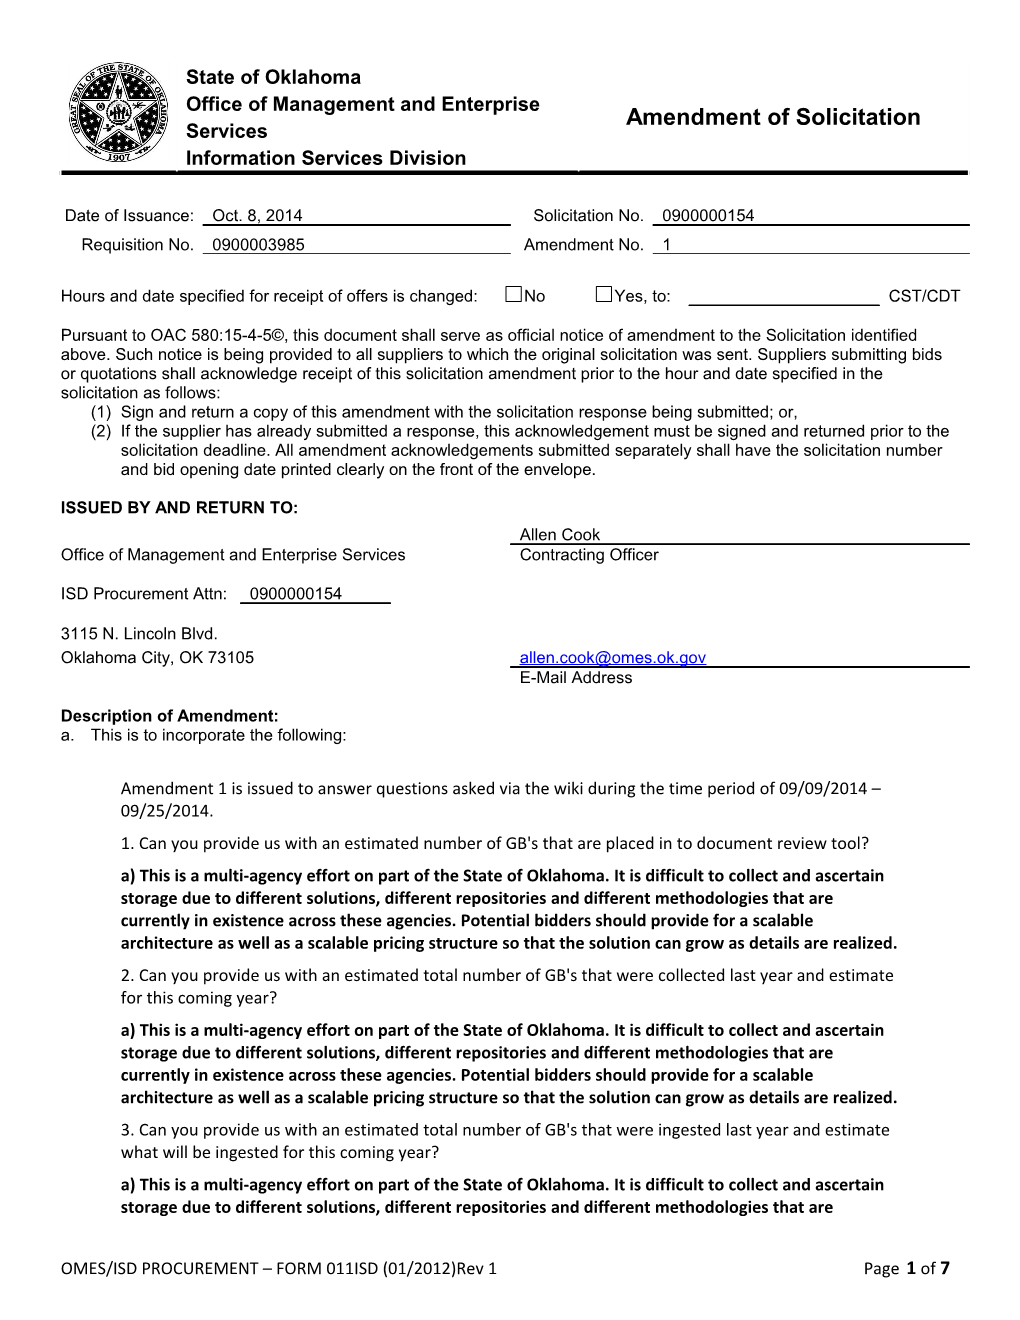 (1) Sign and Return a Copy of This Amendment with the Solicitation Response Being Submitted; Or